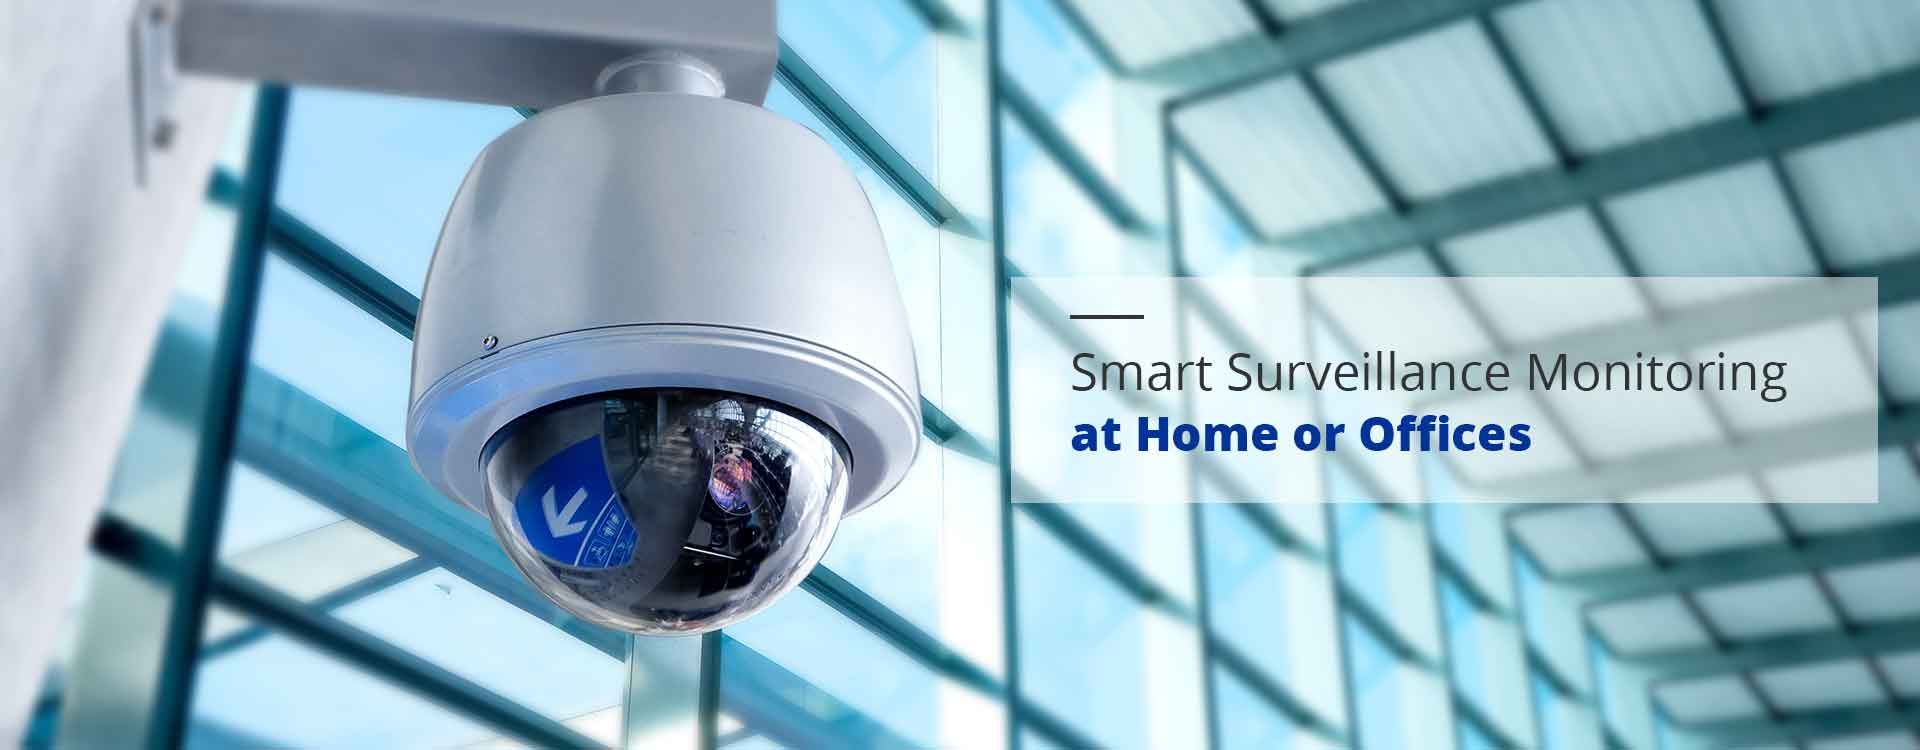 Smart Surveillance Monitoring at Home or Offices